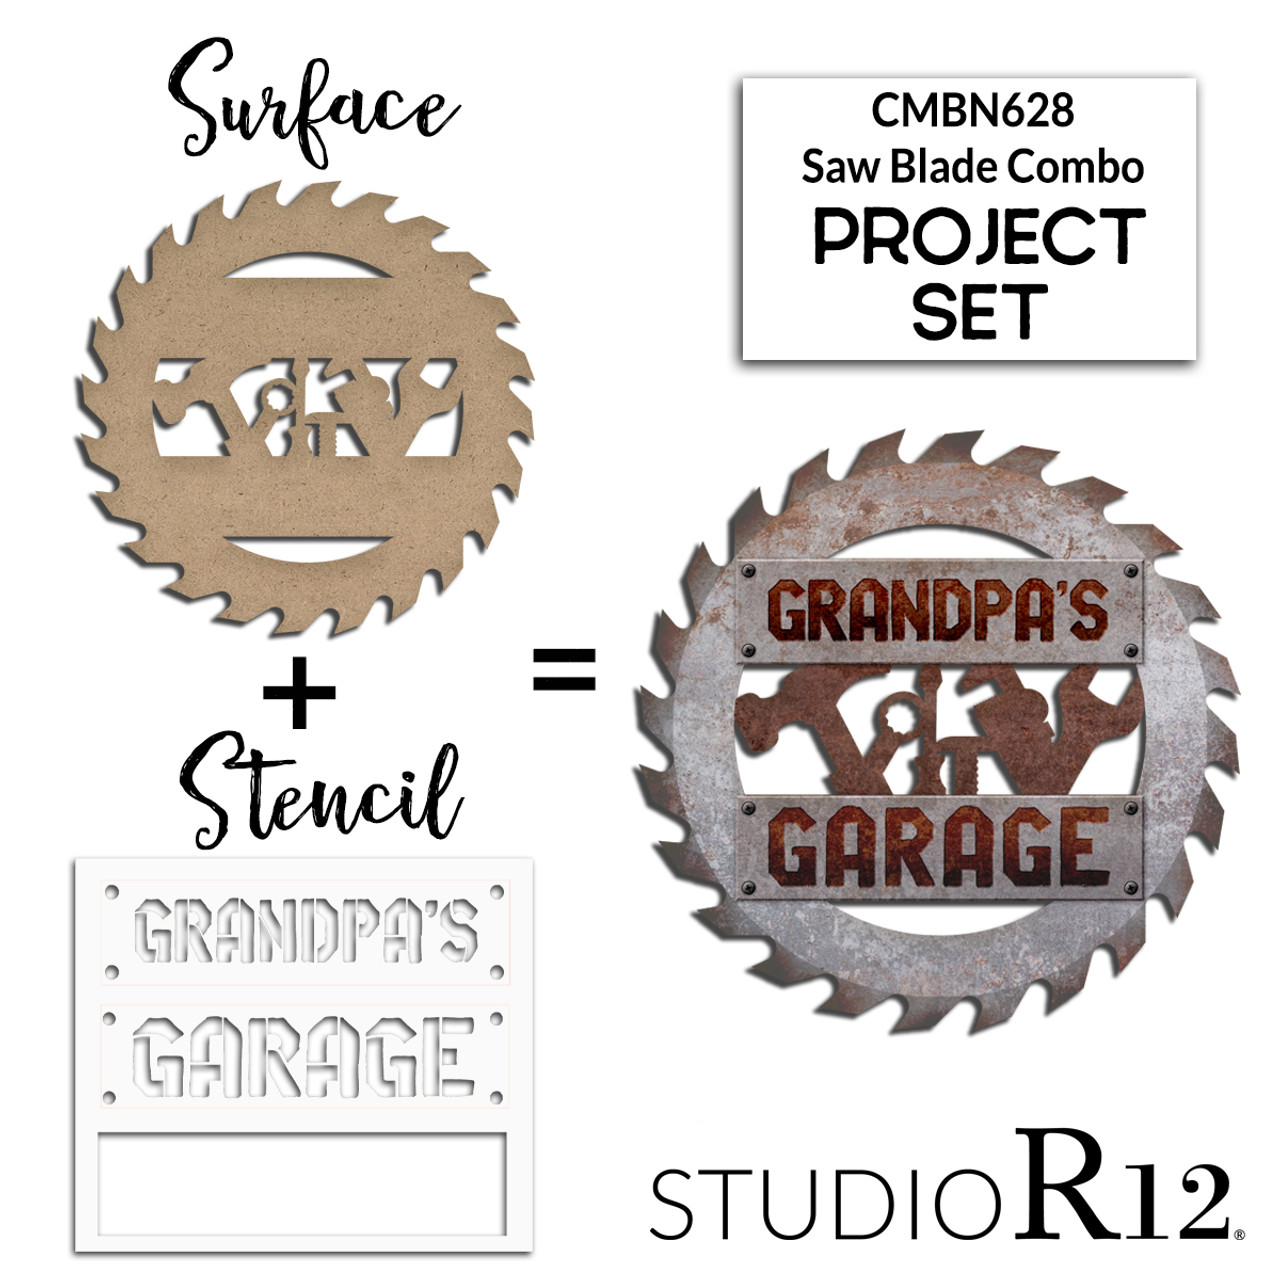 Personalized Garage Saw Blade Project Set | CMBN628